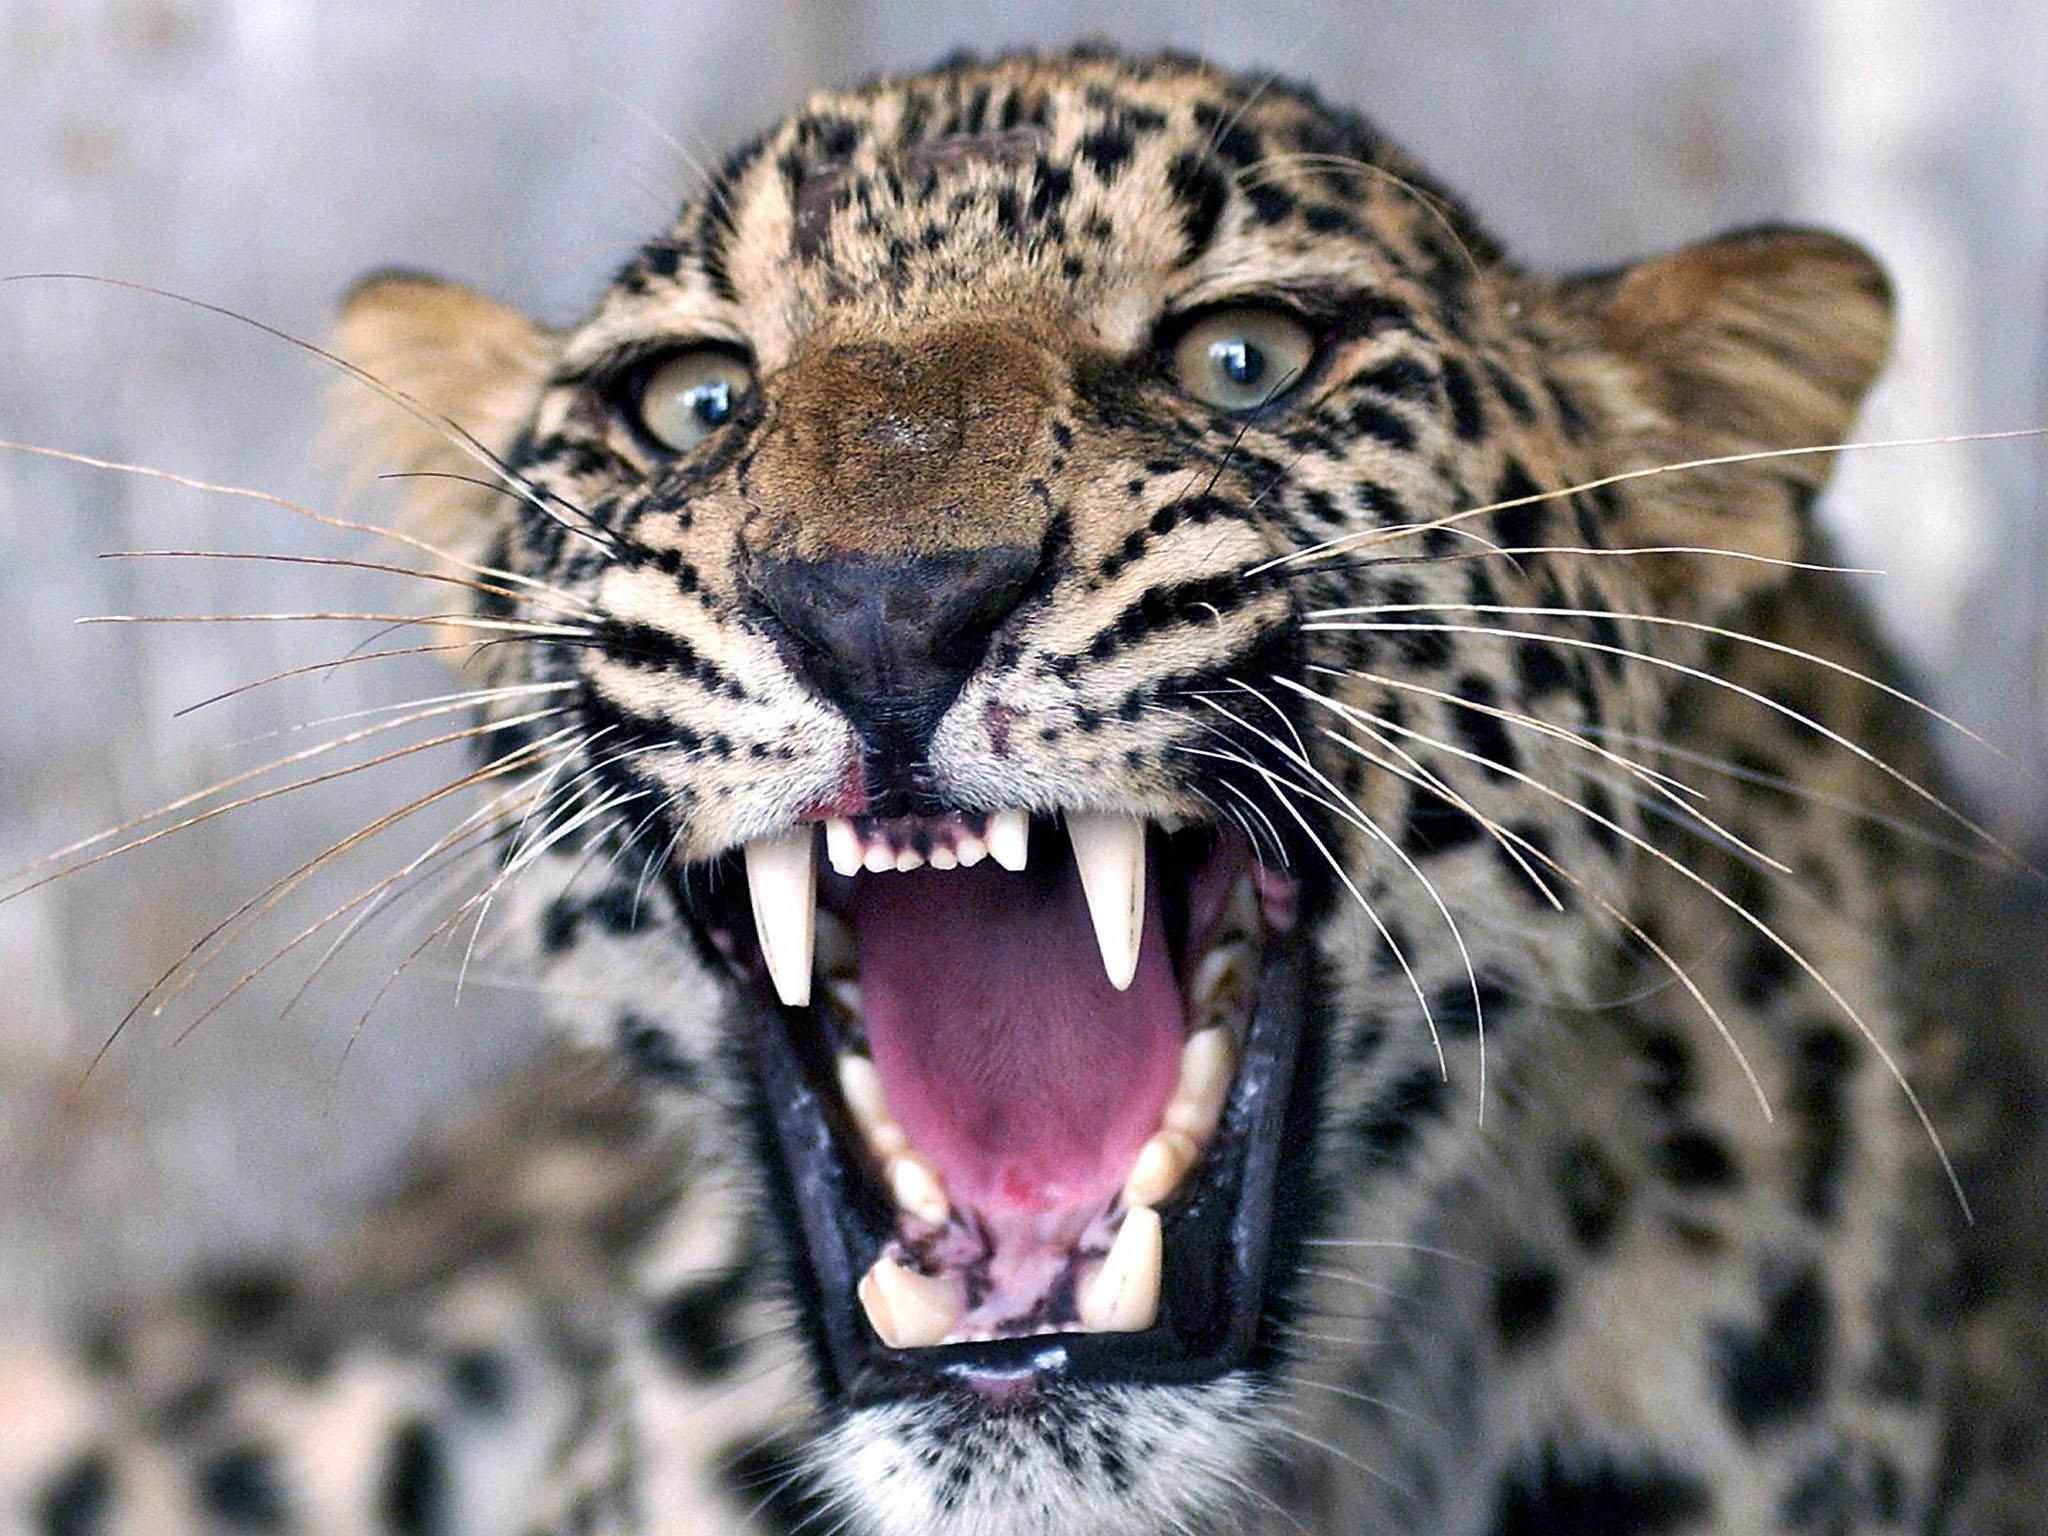 Stock image of leopard in Pakistan roaring as employees of the Wildlife Department try to give it an injection in 2006